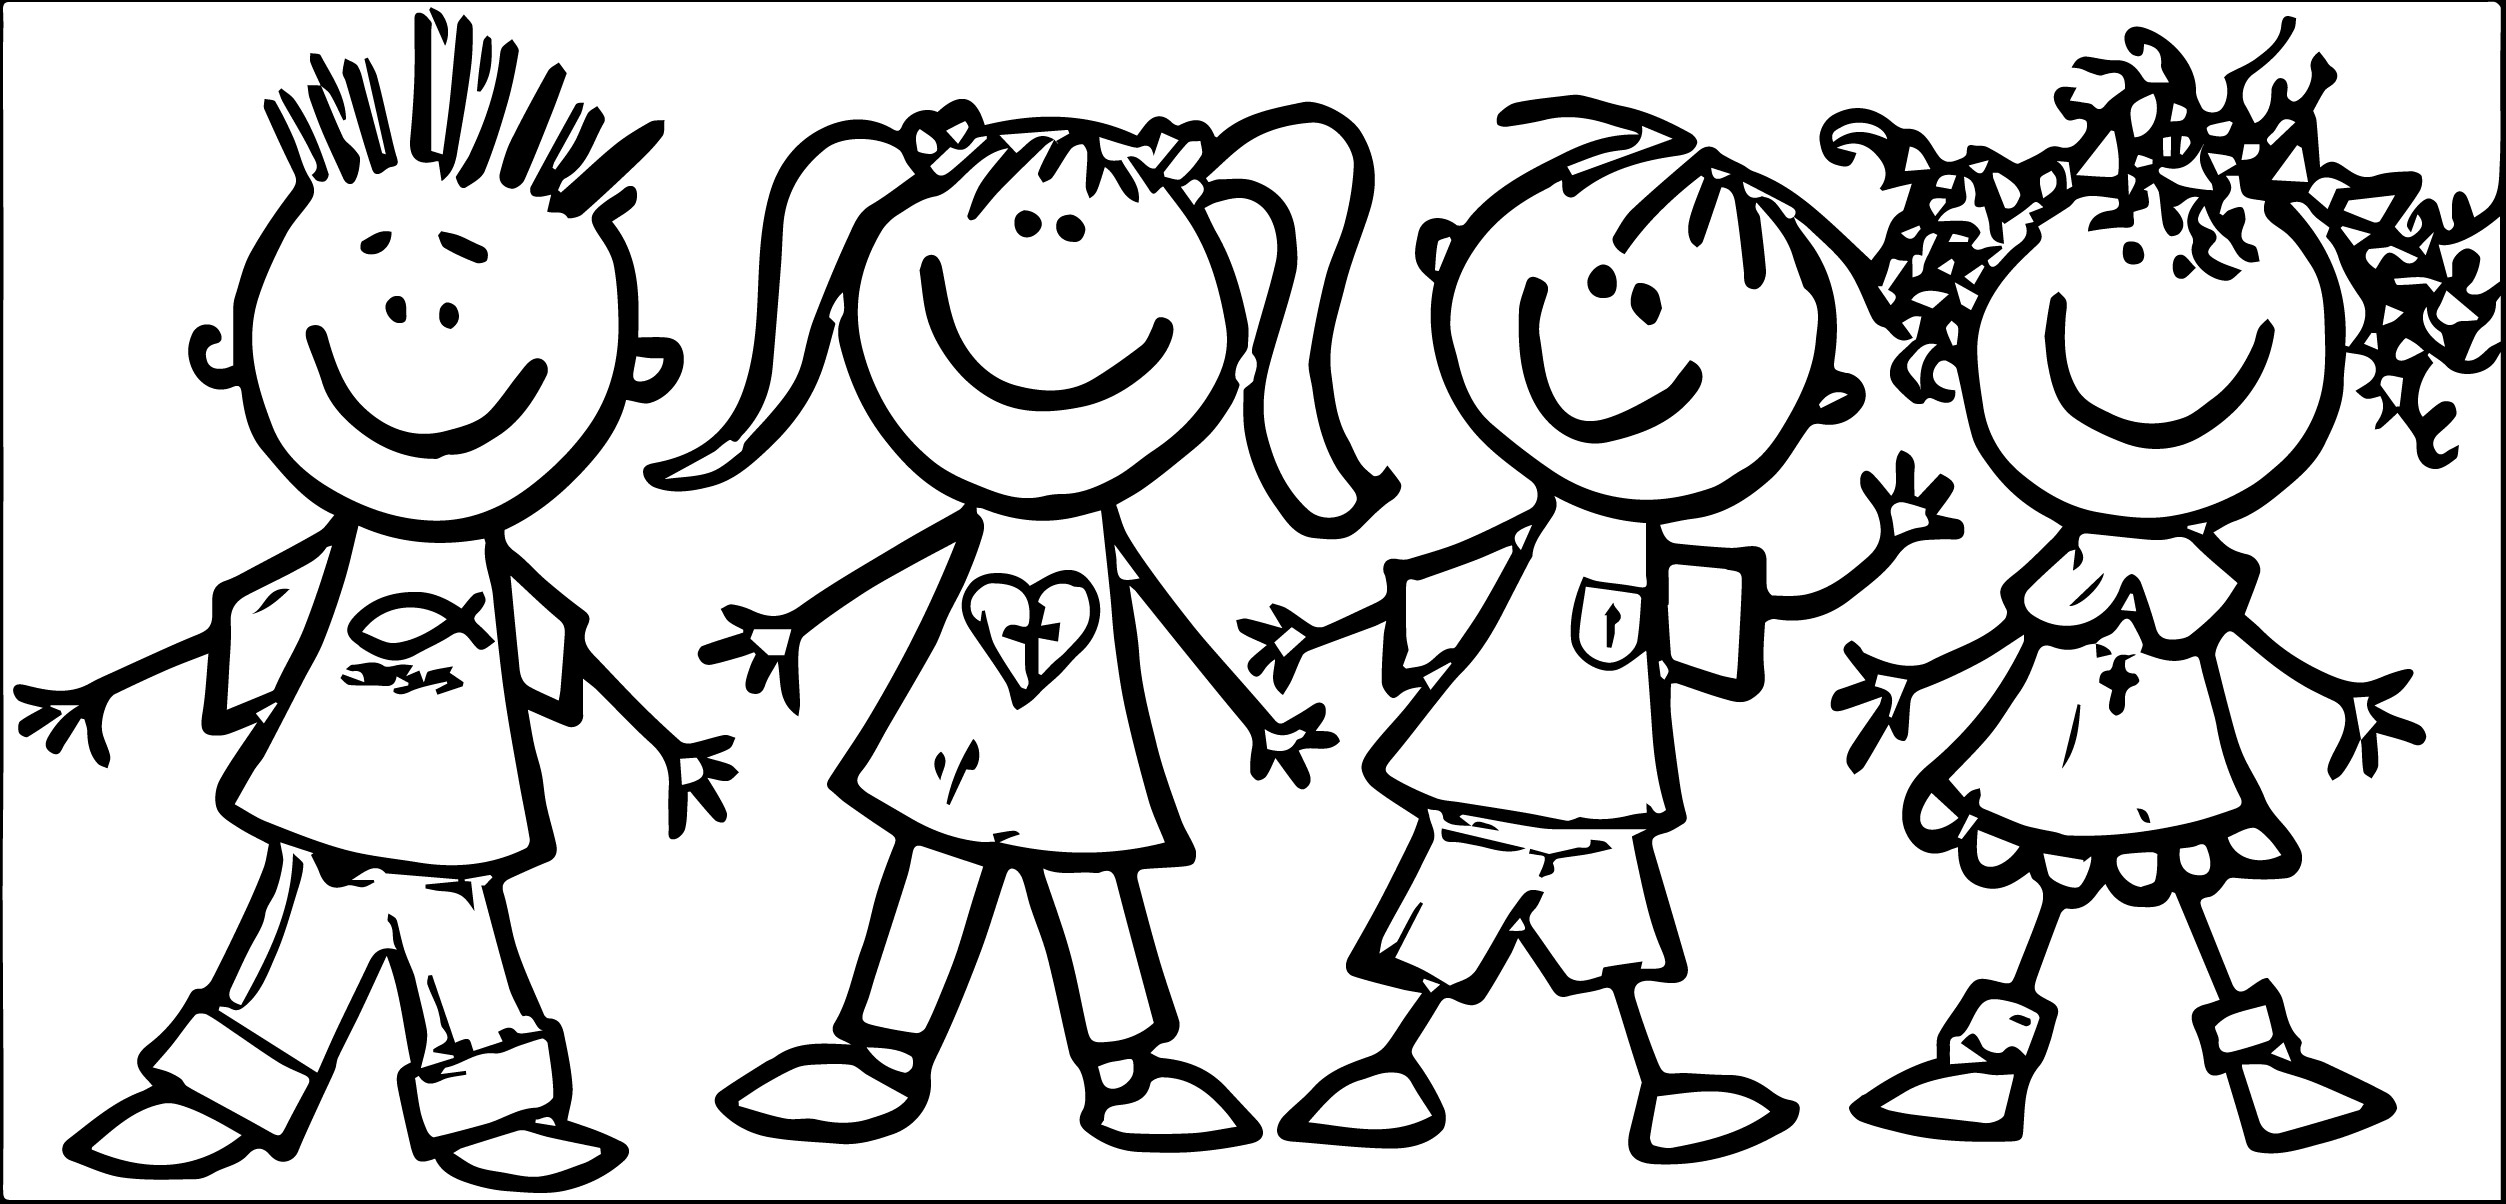 Daycare clipart black and white